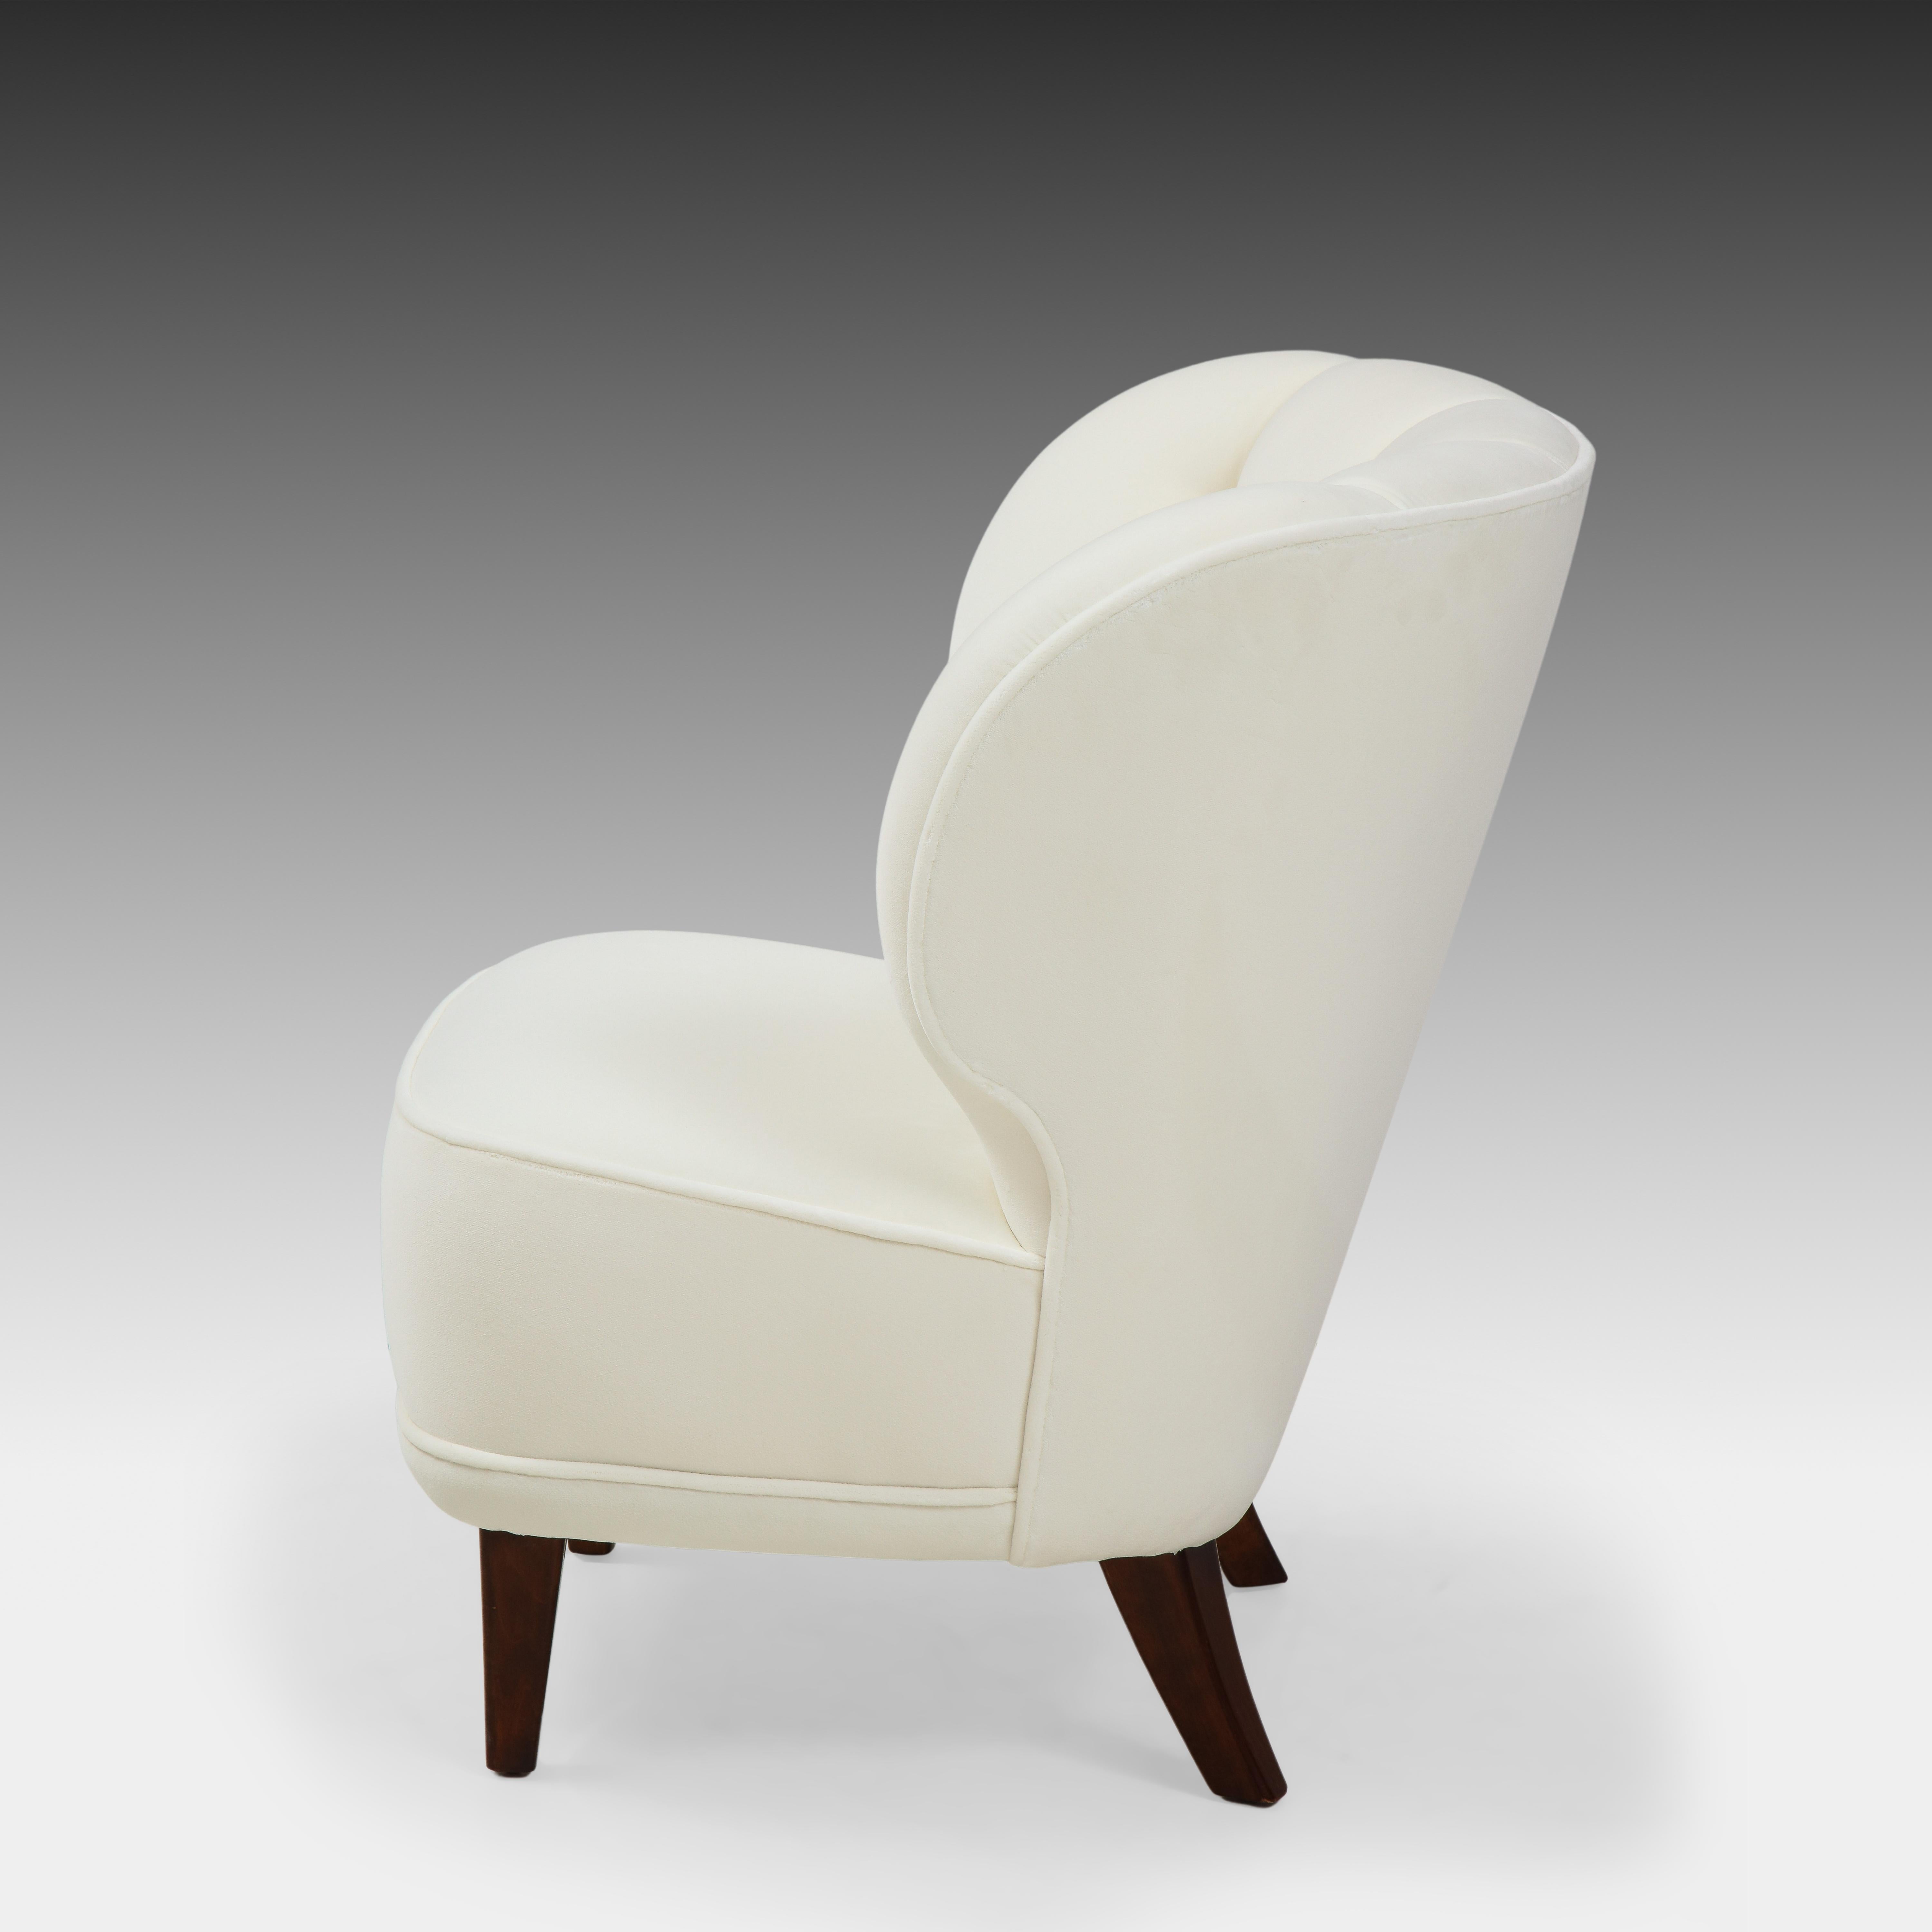 Carl-Johan Boman Rare Pair of Ivory Velvet Tufted Easy Chairs, Finland, 1940s For Sale 2